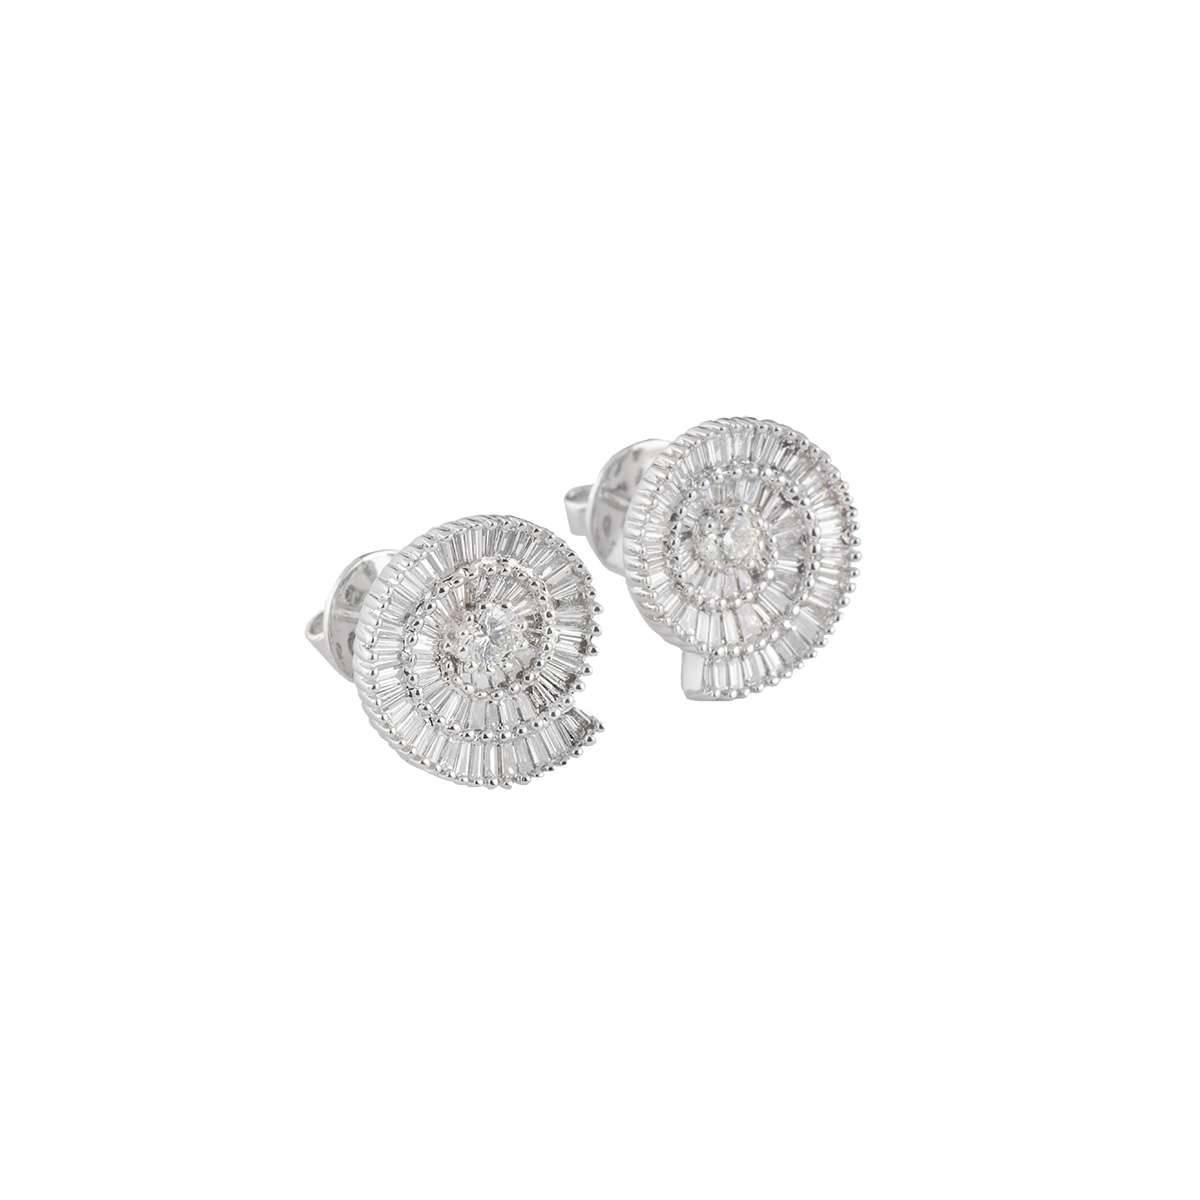 A stylish pair of 18k white gold diamond earrings. The earrings have baguette cut diamonds set in a spiral meeting a round brilliant cut diamond totalling to a weight of 2.35ct, colour H and clarity VS. The diamonds are set in a prong setting